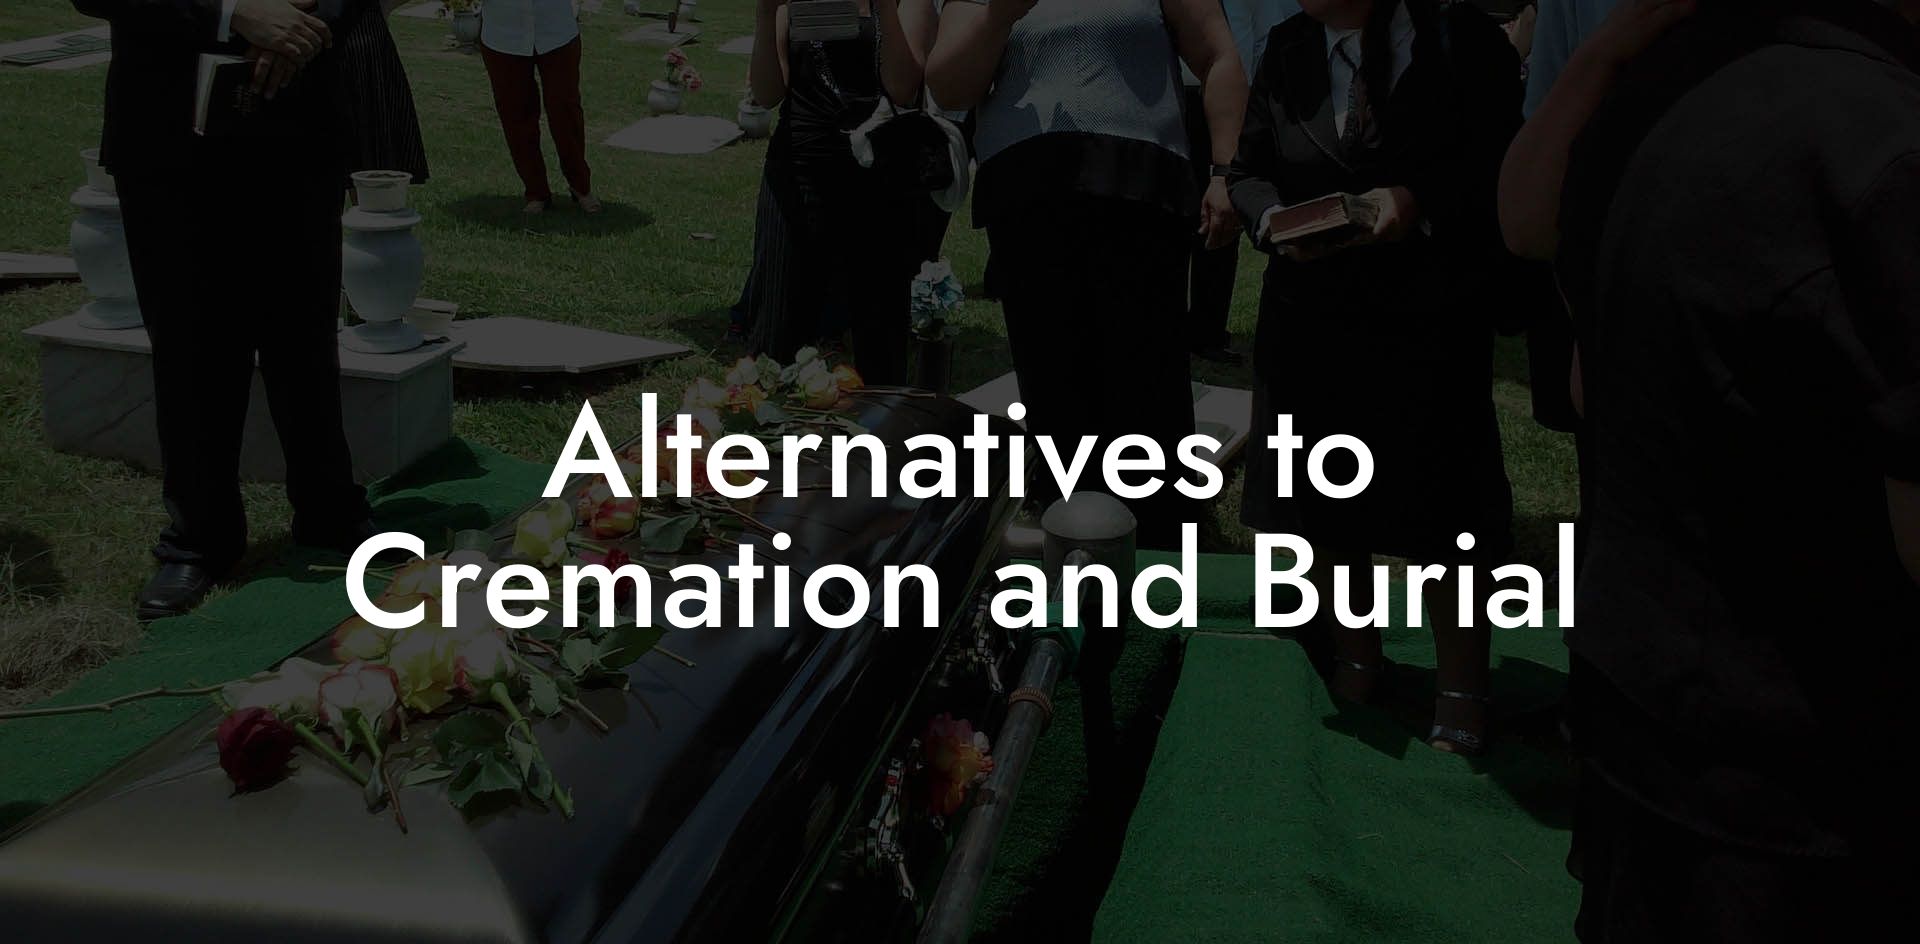 Alternatives to Cremation and Burial